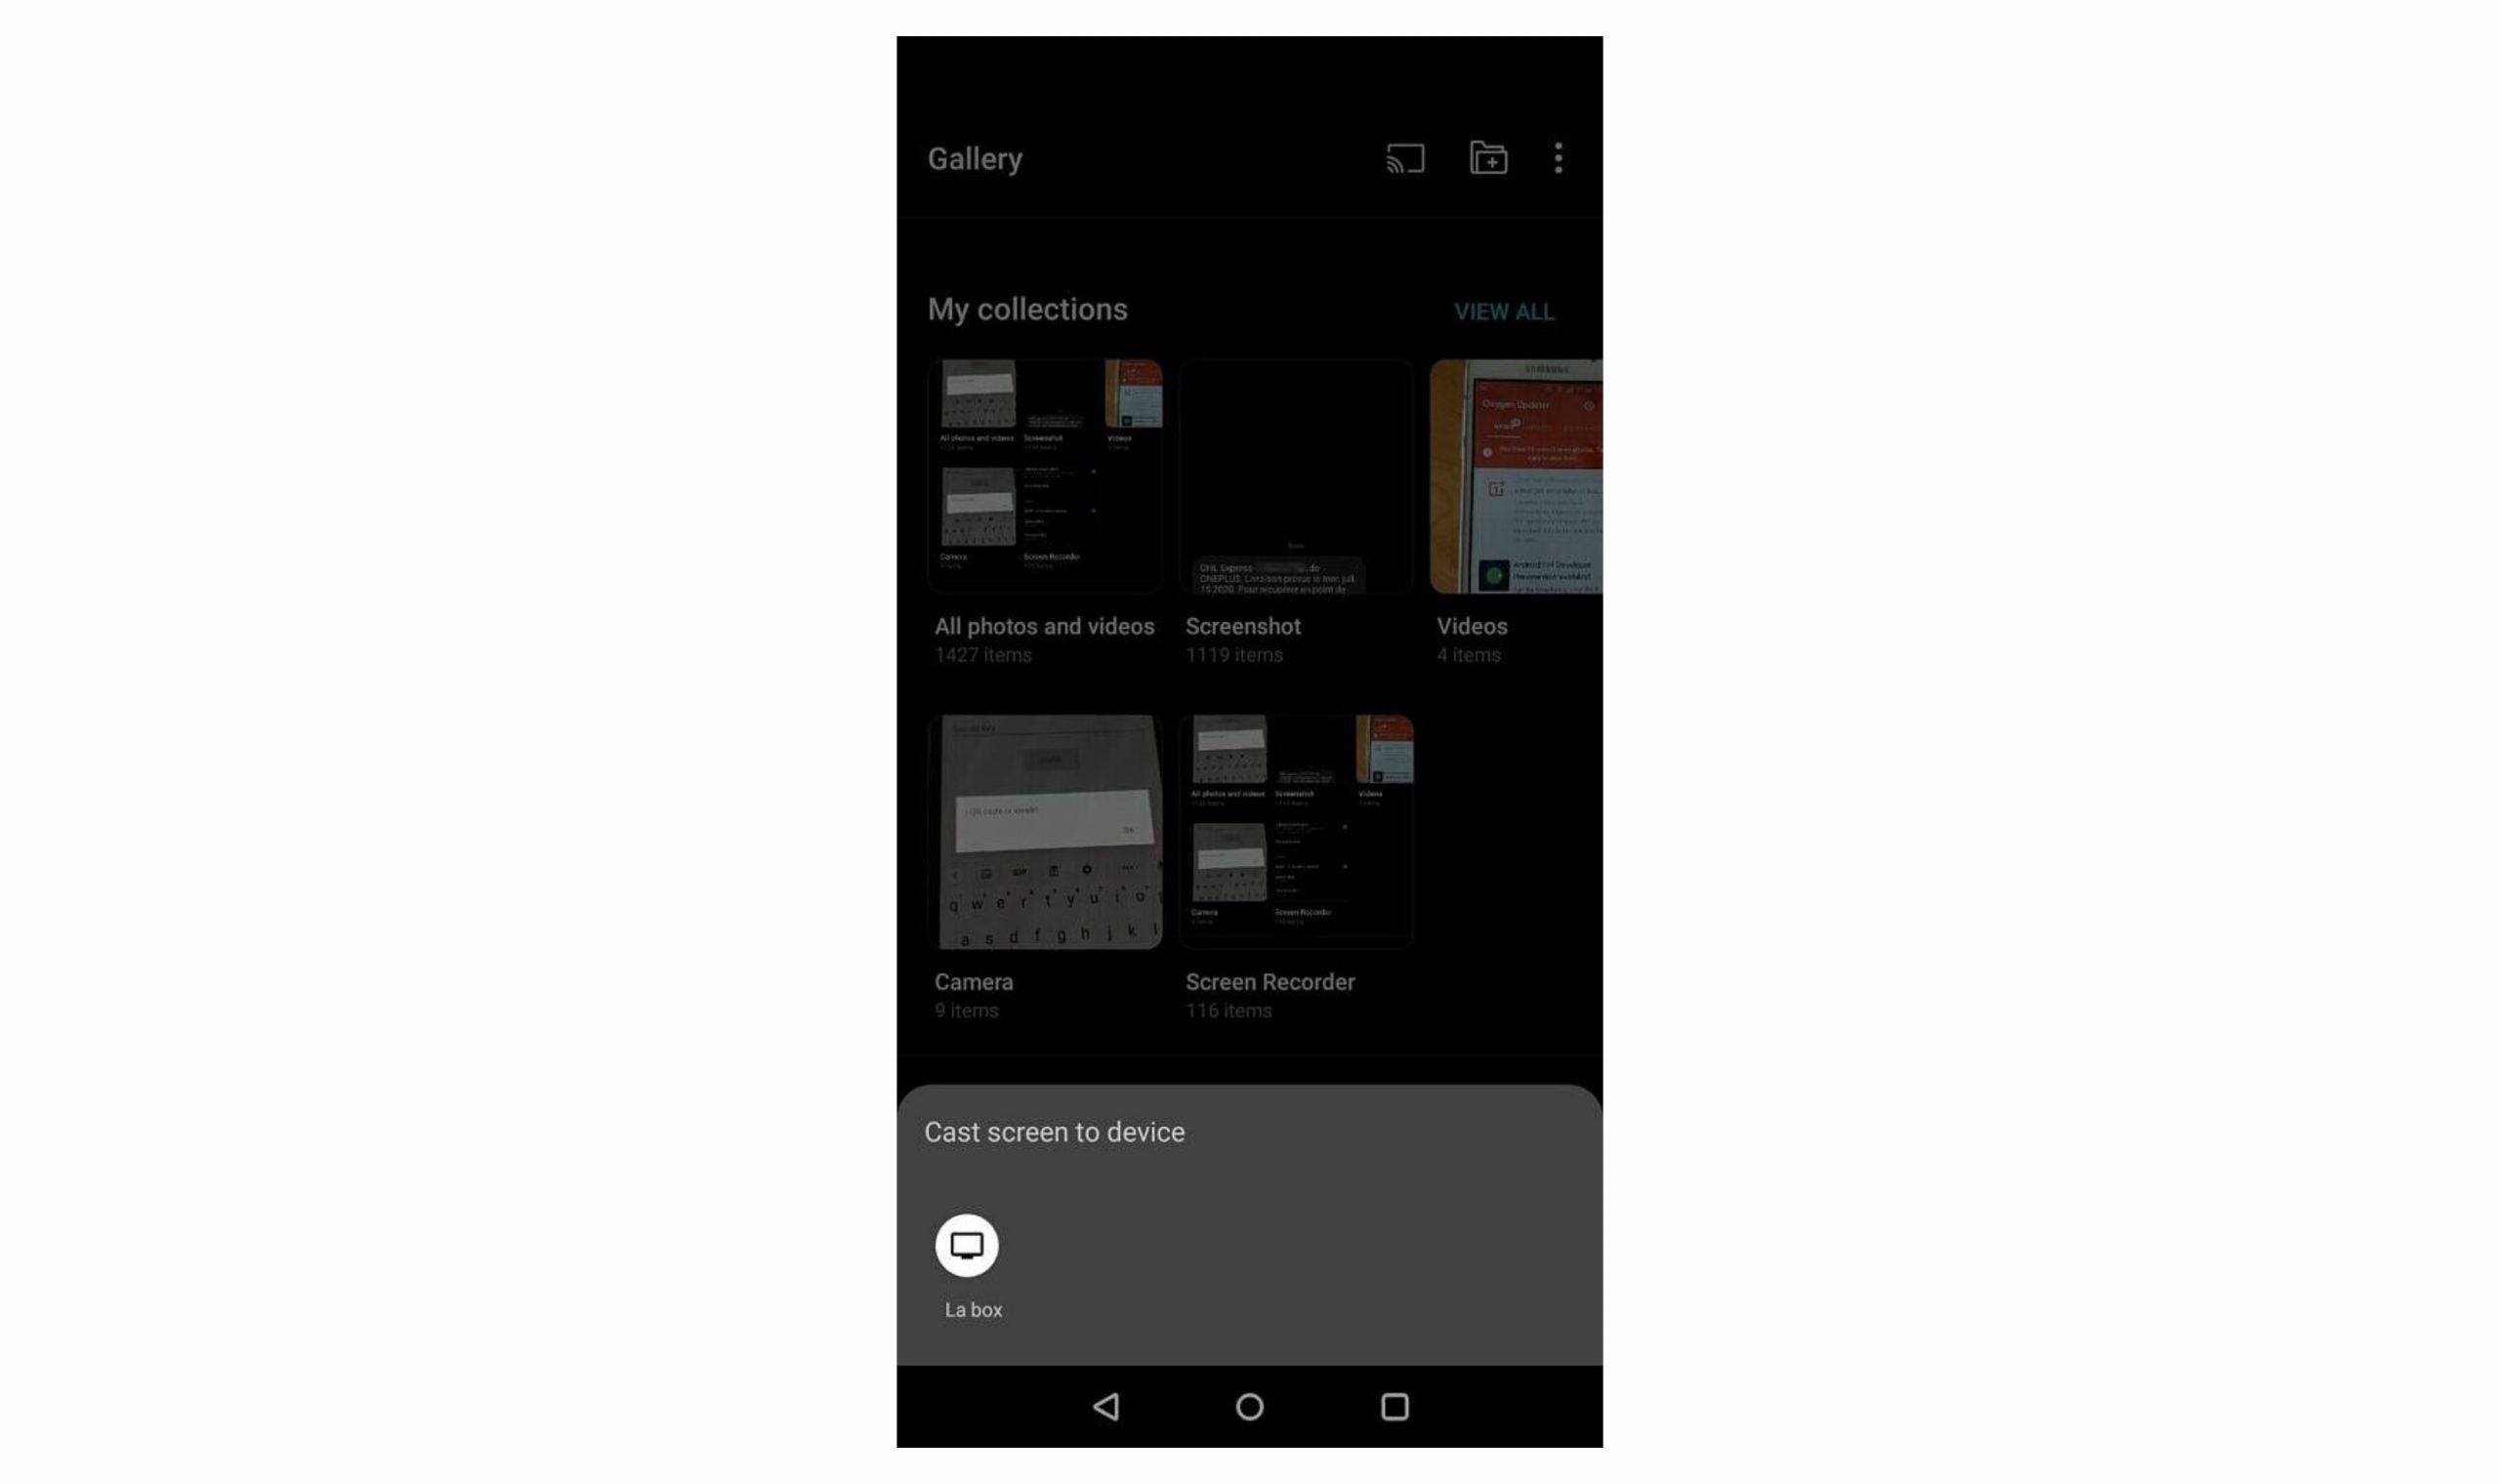 [Download APK] OnePlus Gallery v3.12.33 adds casting option